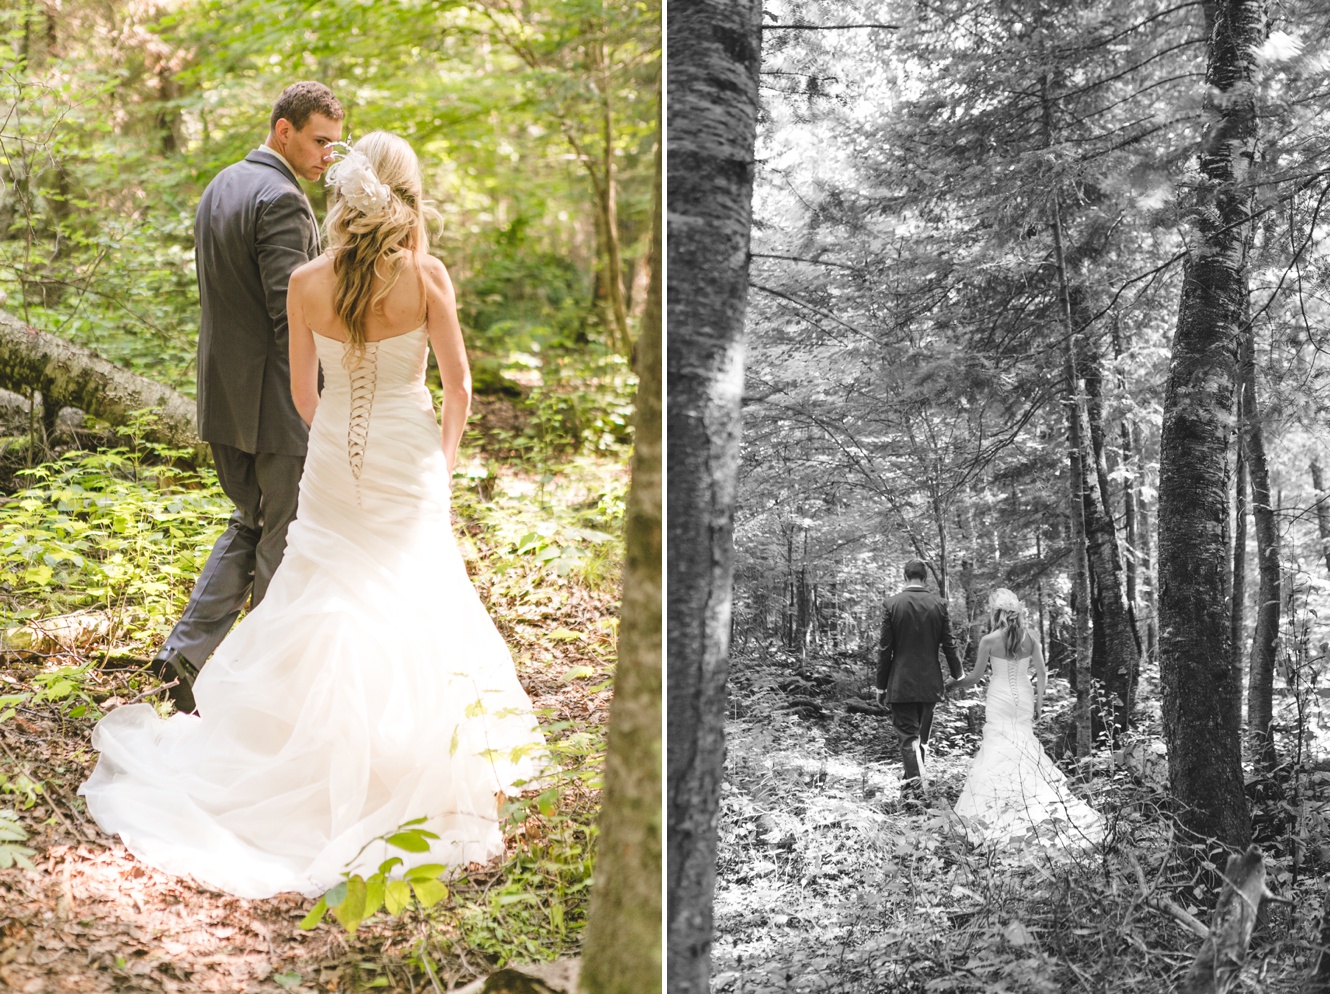 pineridge-hollow-manitoba-storybook-fairytale-wedding-kristen-booth-vintage-forest-enchanged-woodsy-bridal-portraits-photography-photographer_0063